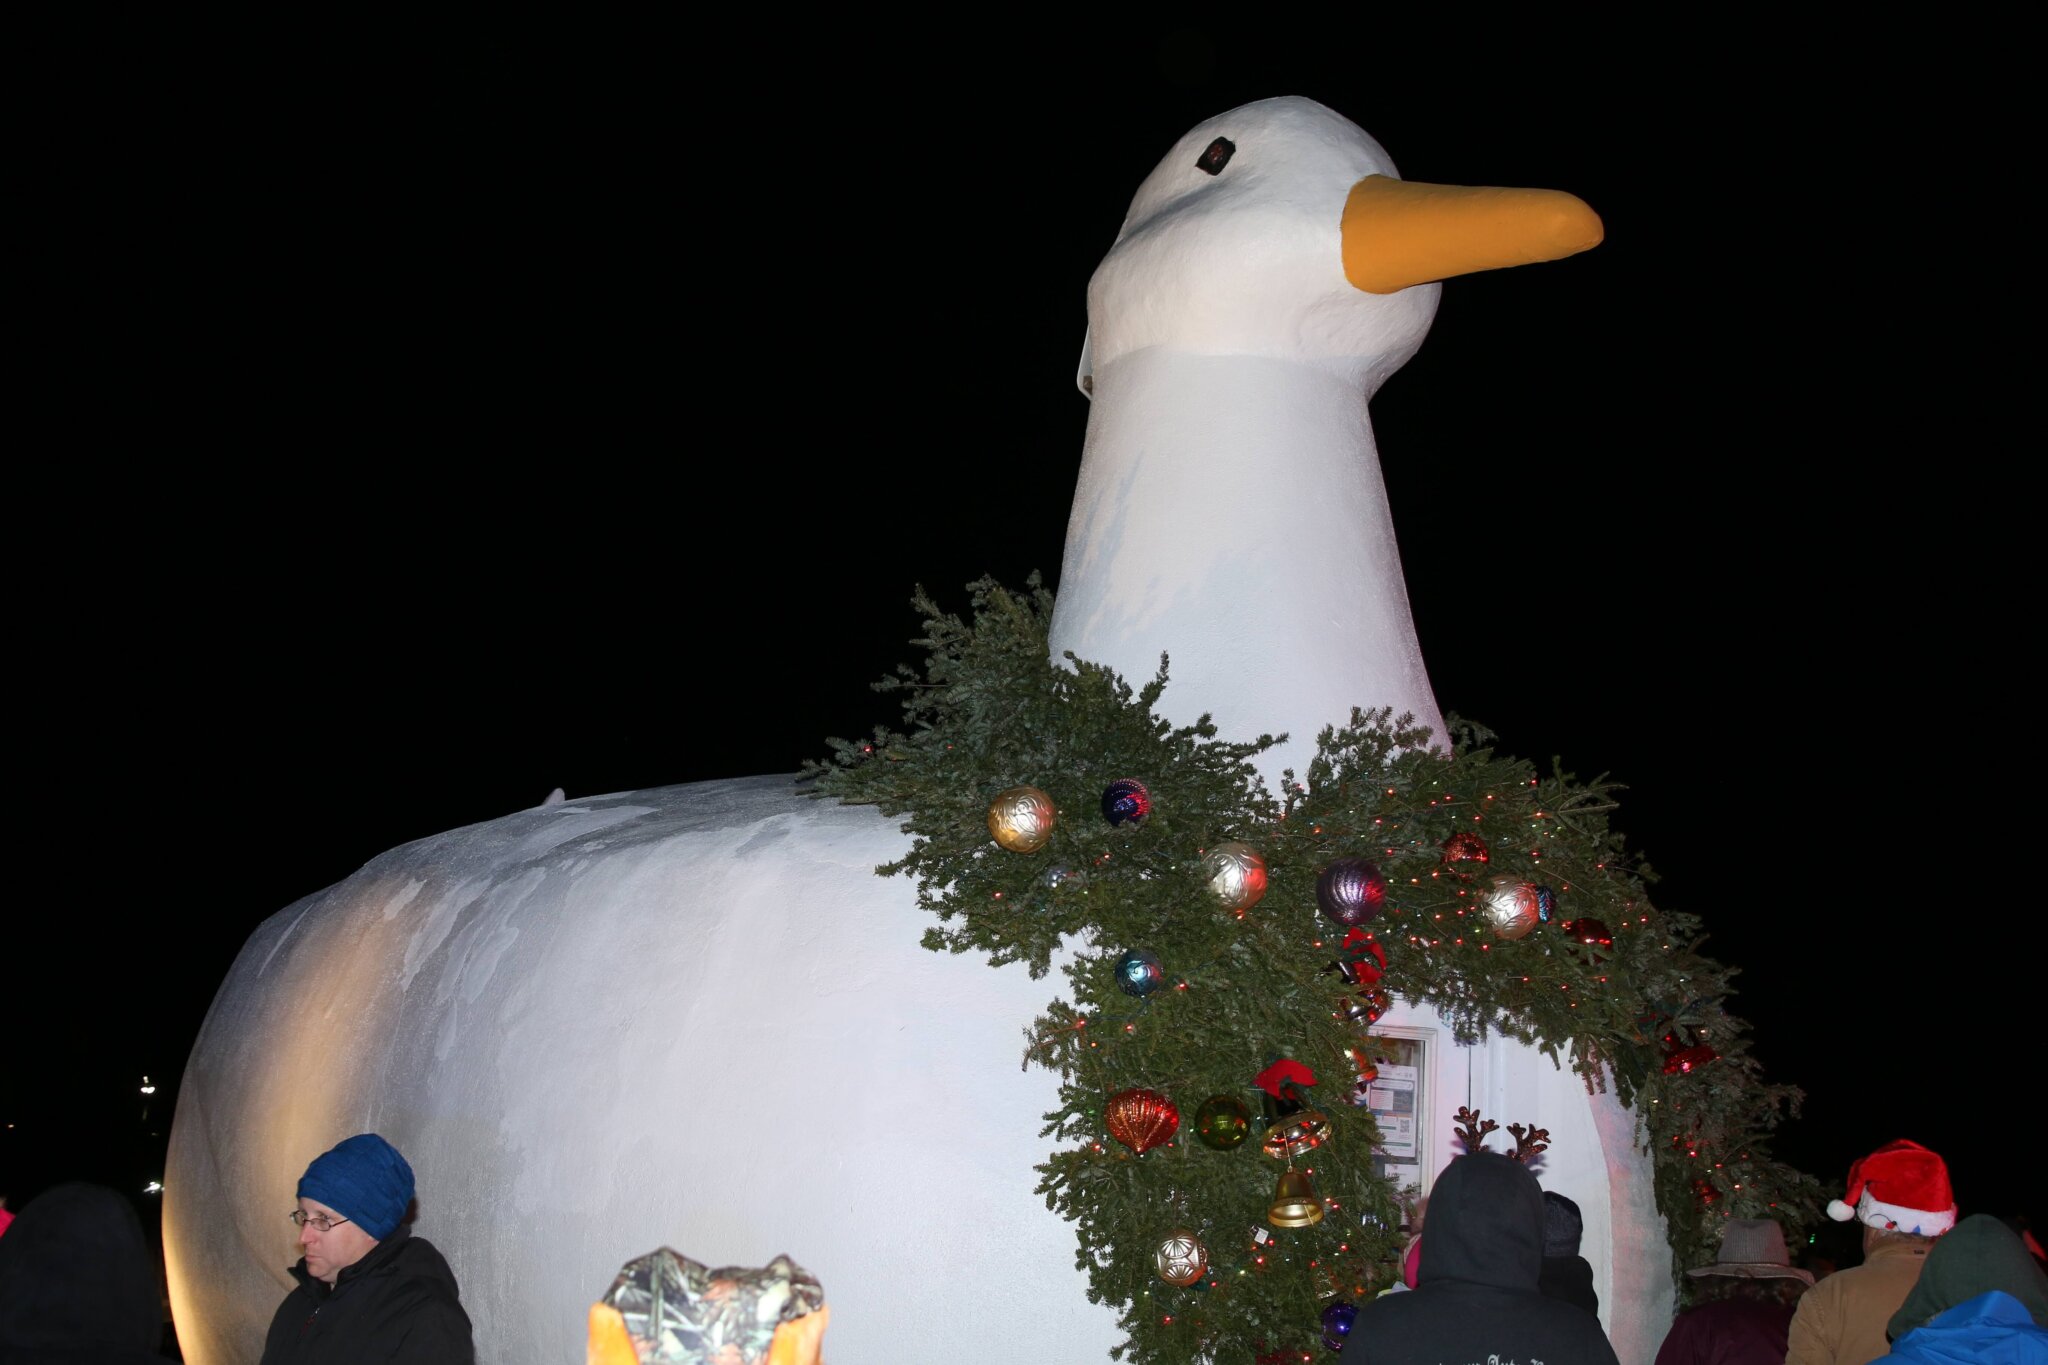 The Big Duck with its holiday wreath